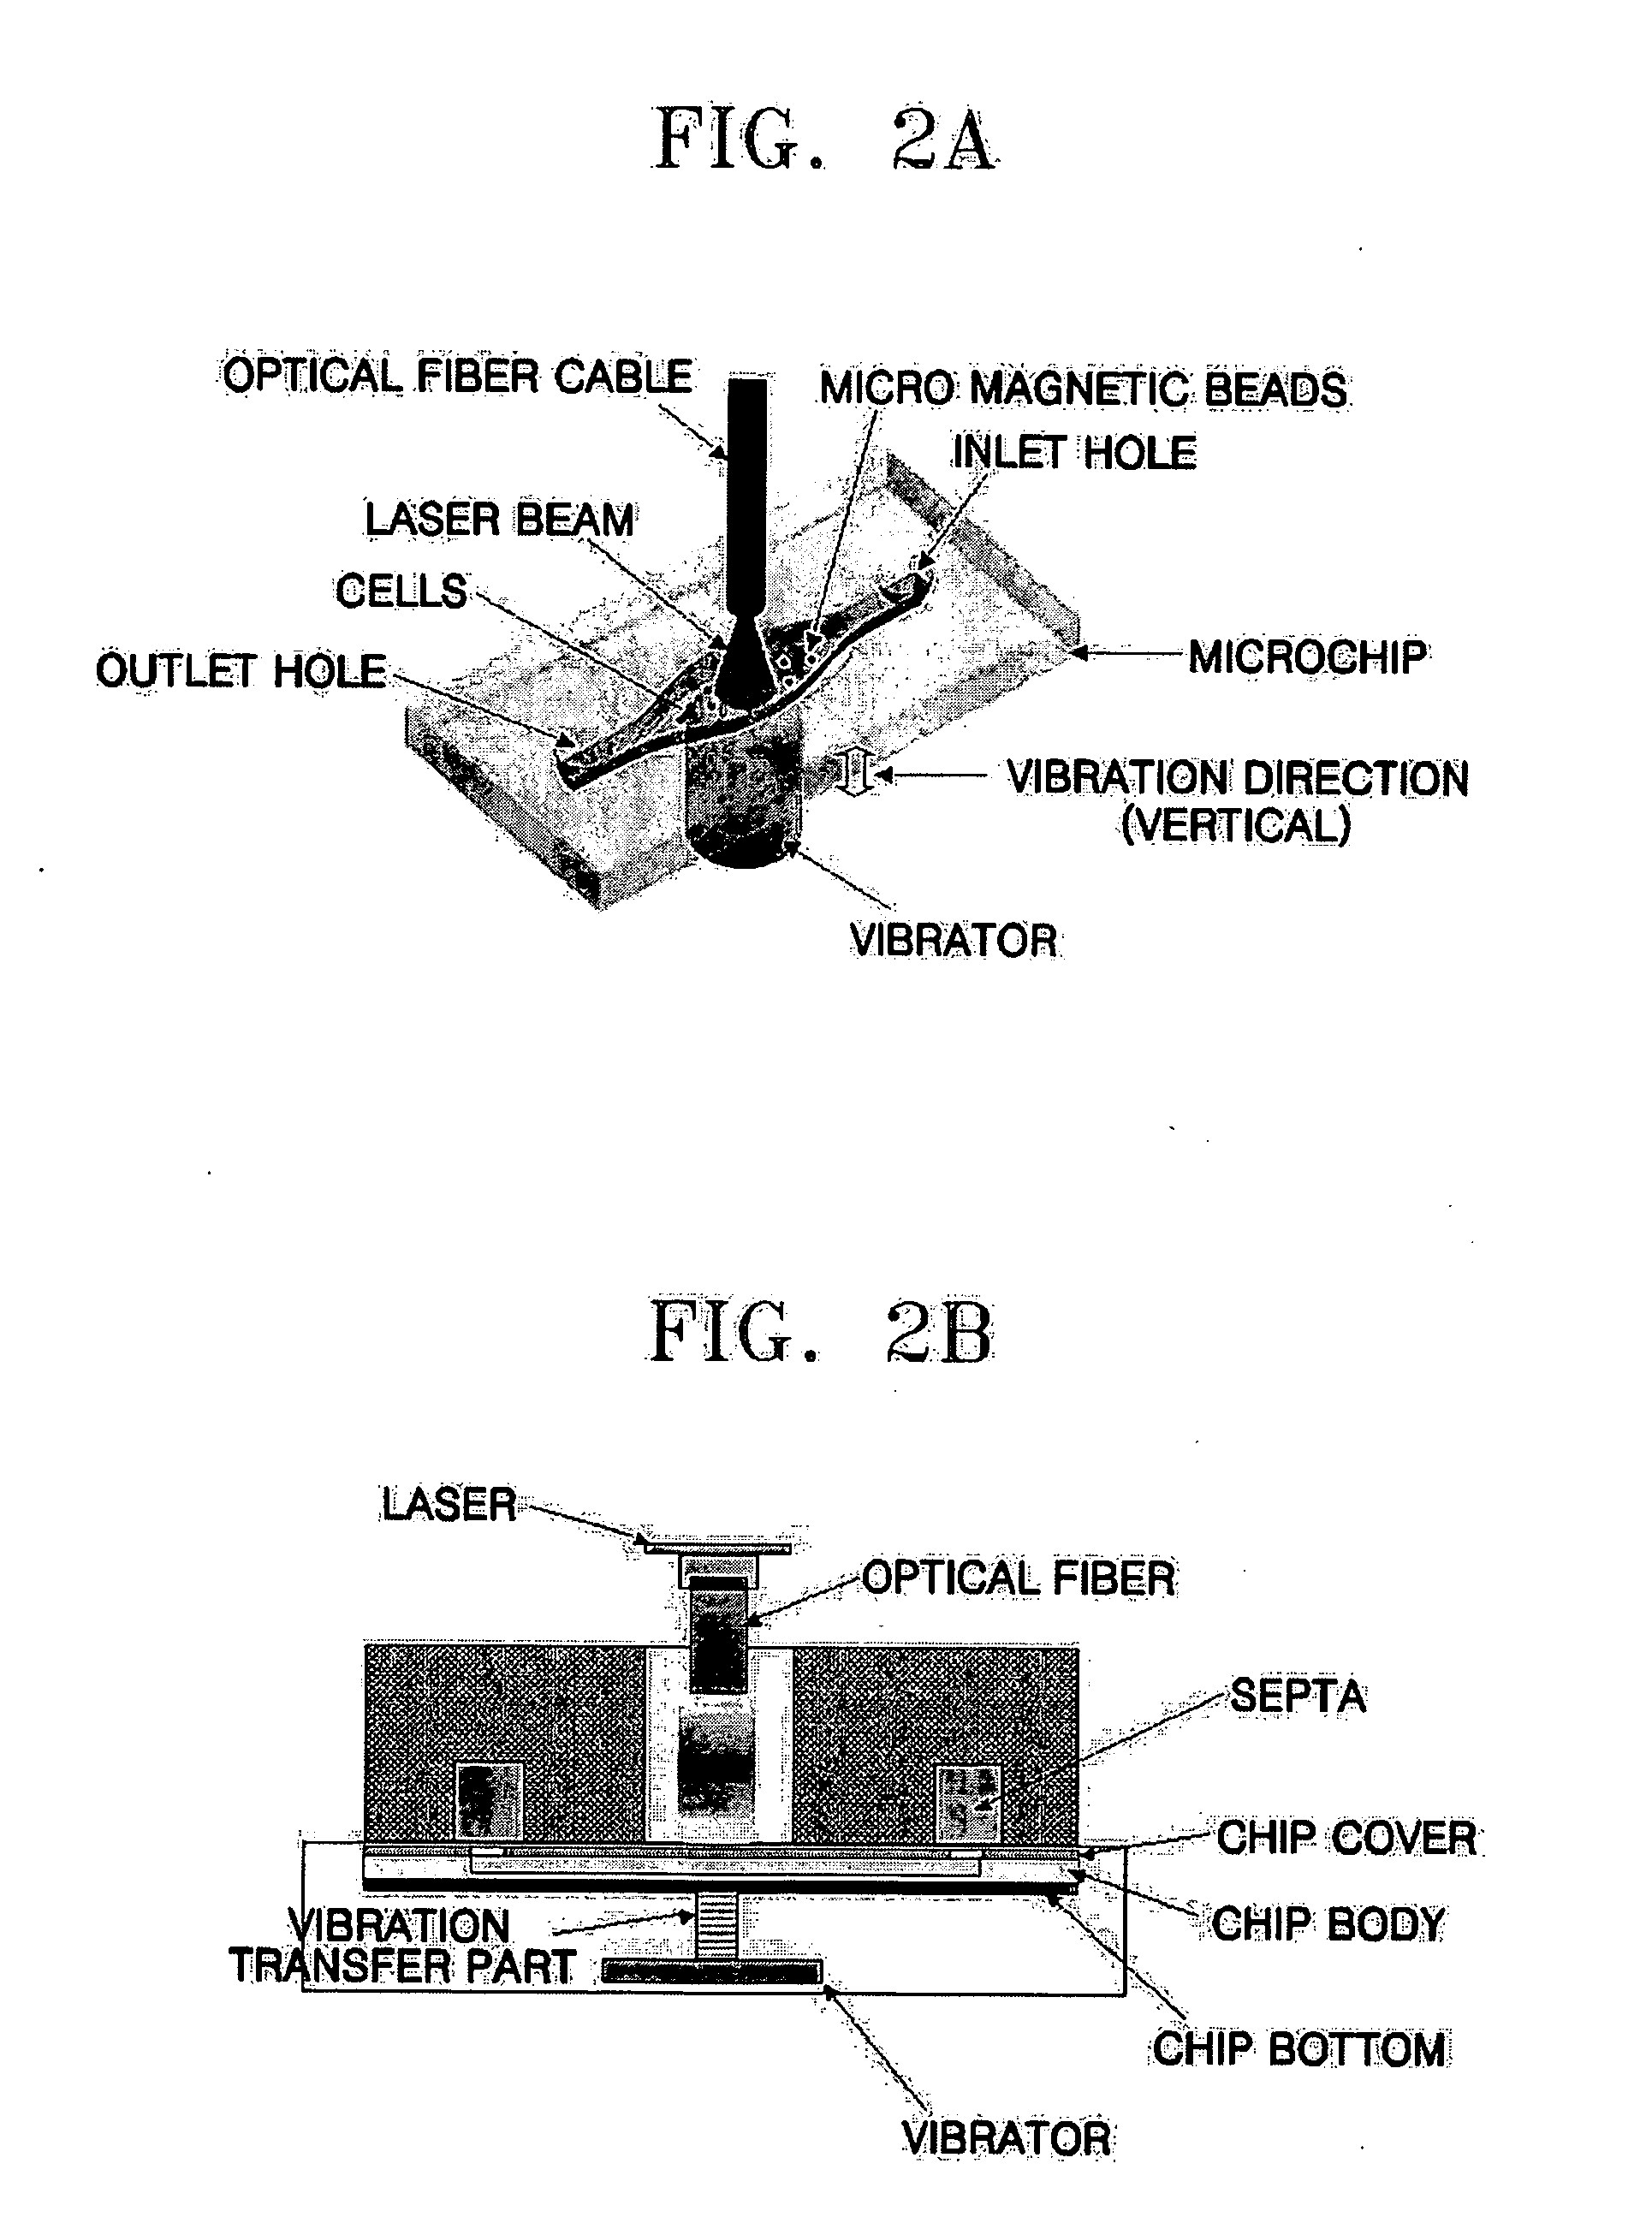 Method and apparatus for the rapid disruption of cells or viruses using micro magnetic beads and laser